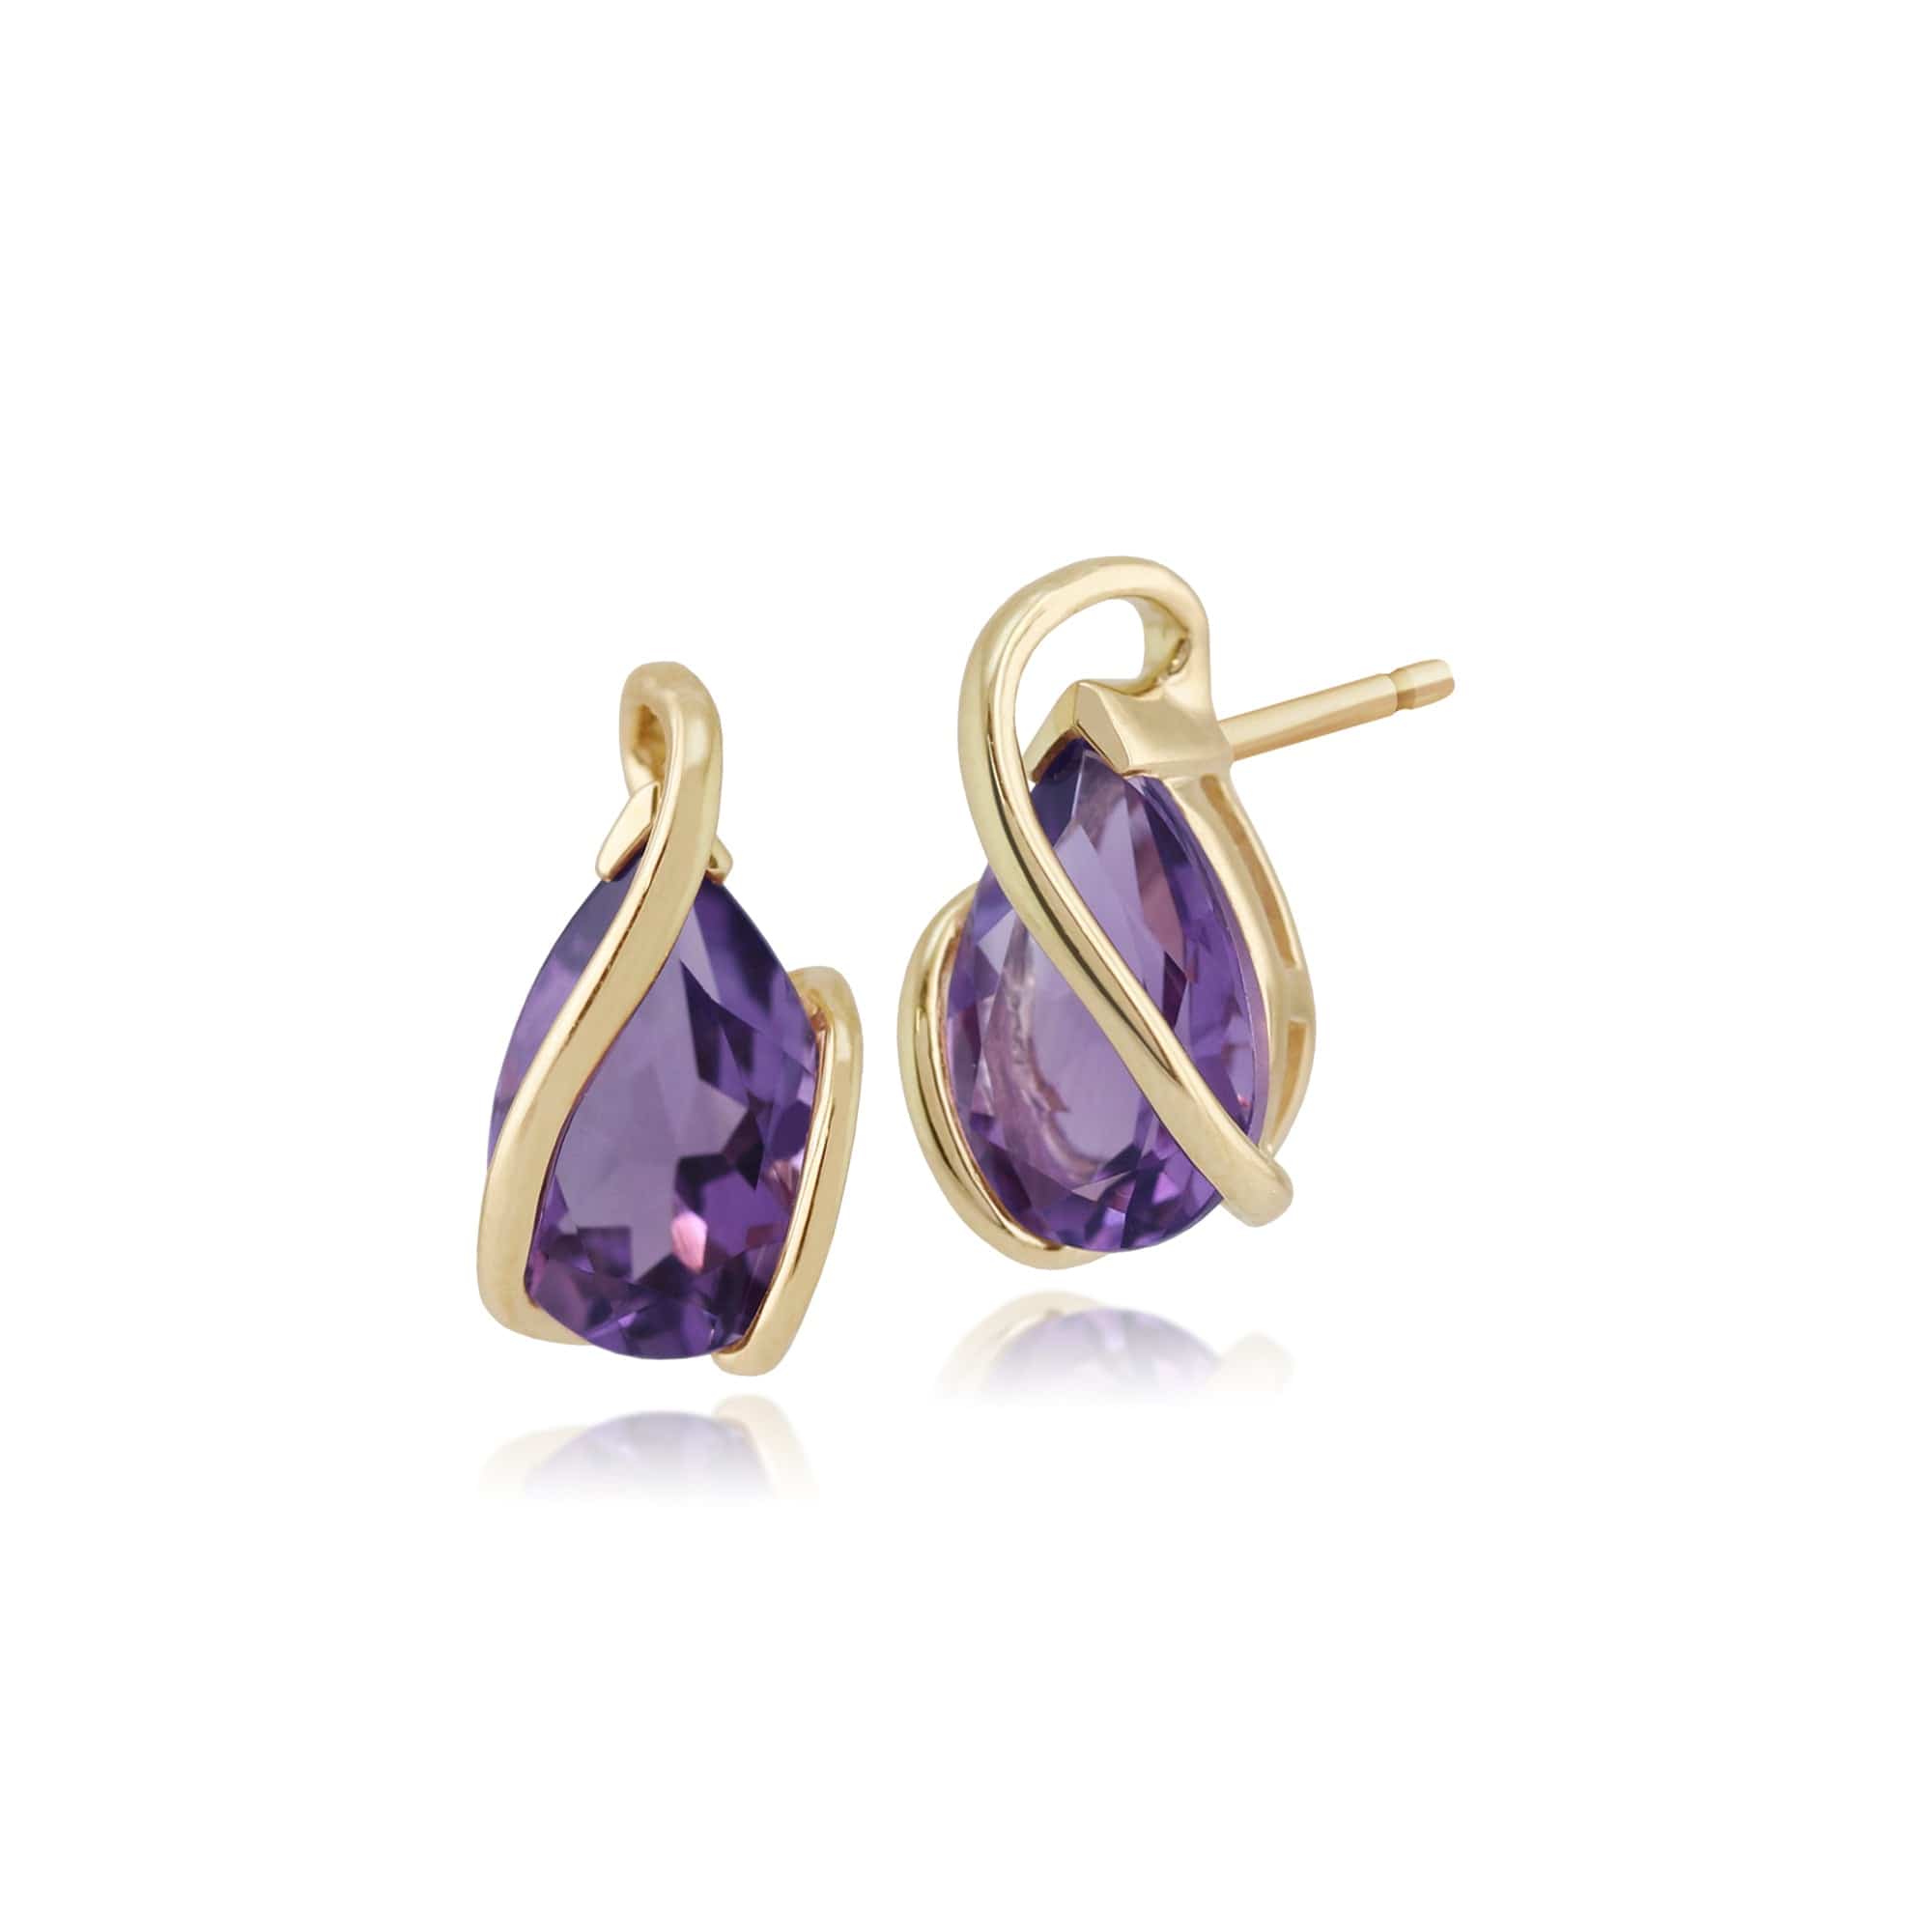 Gemondo 9ct Yellow Gold 1.97ct Pear Cut Amethyst Wrapped Stud Earrings Image